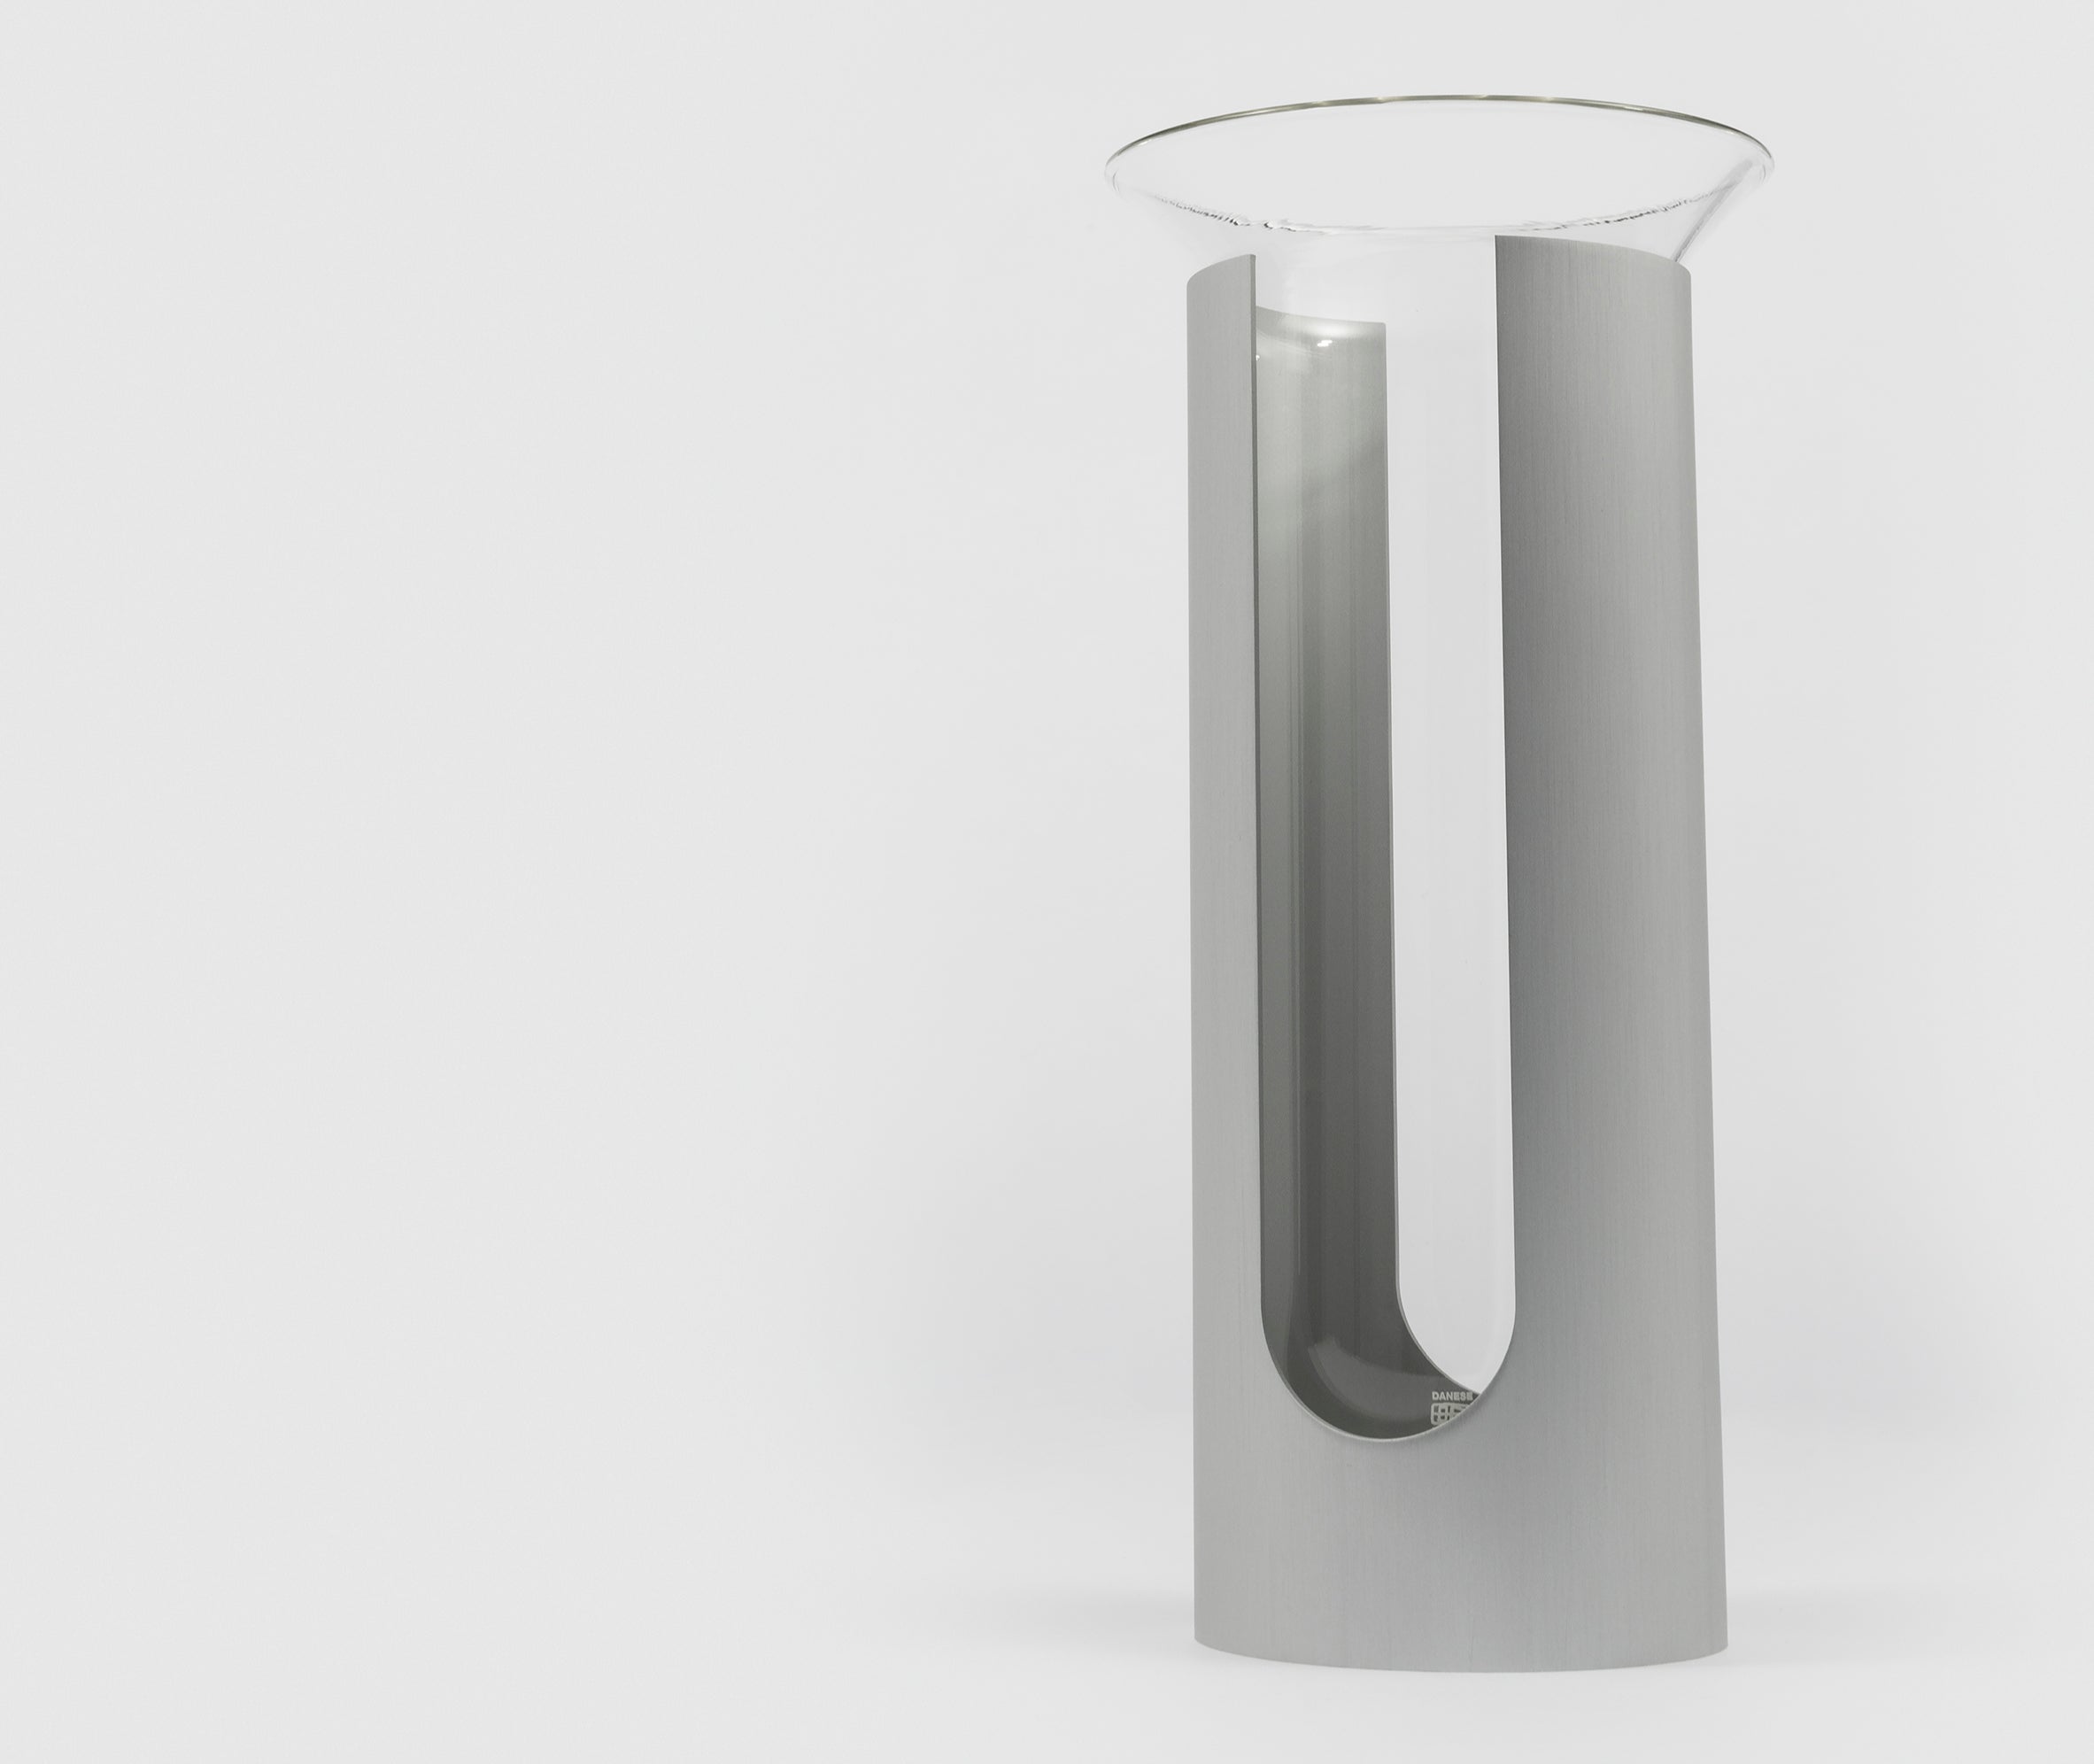 Camicia , glass flower vase with aluminium cylinder